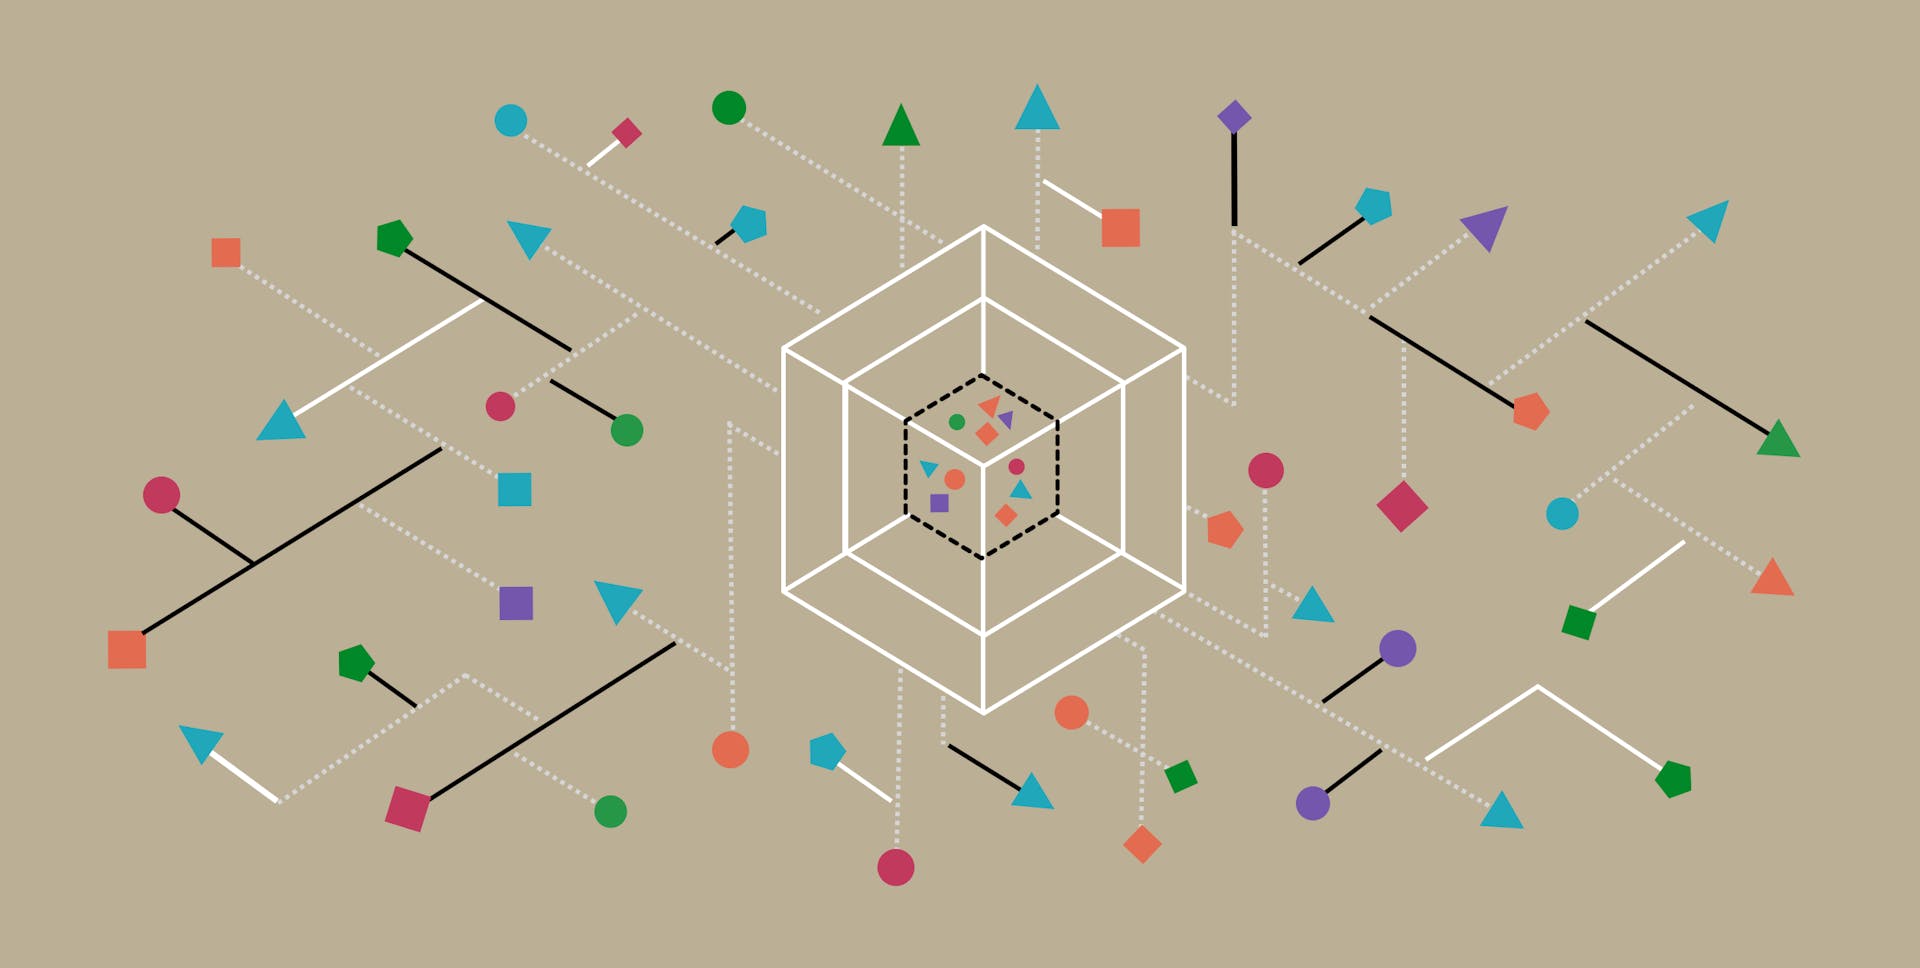 Abstract illustration of a white outline of a cube with arrows and shapes all around it